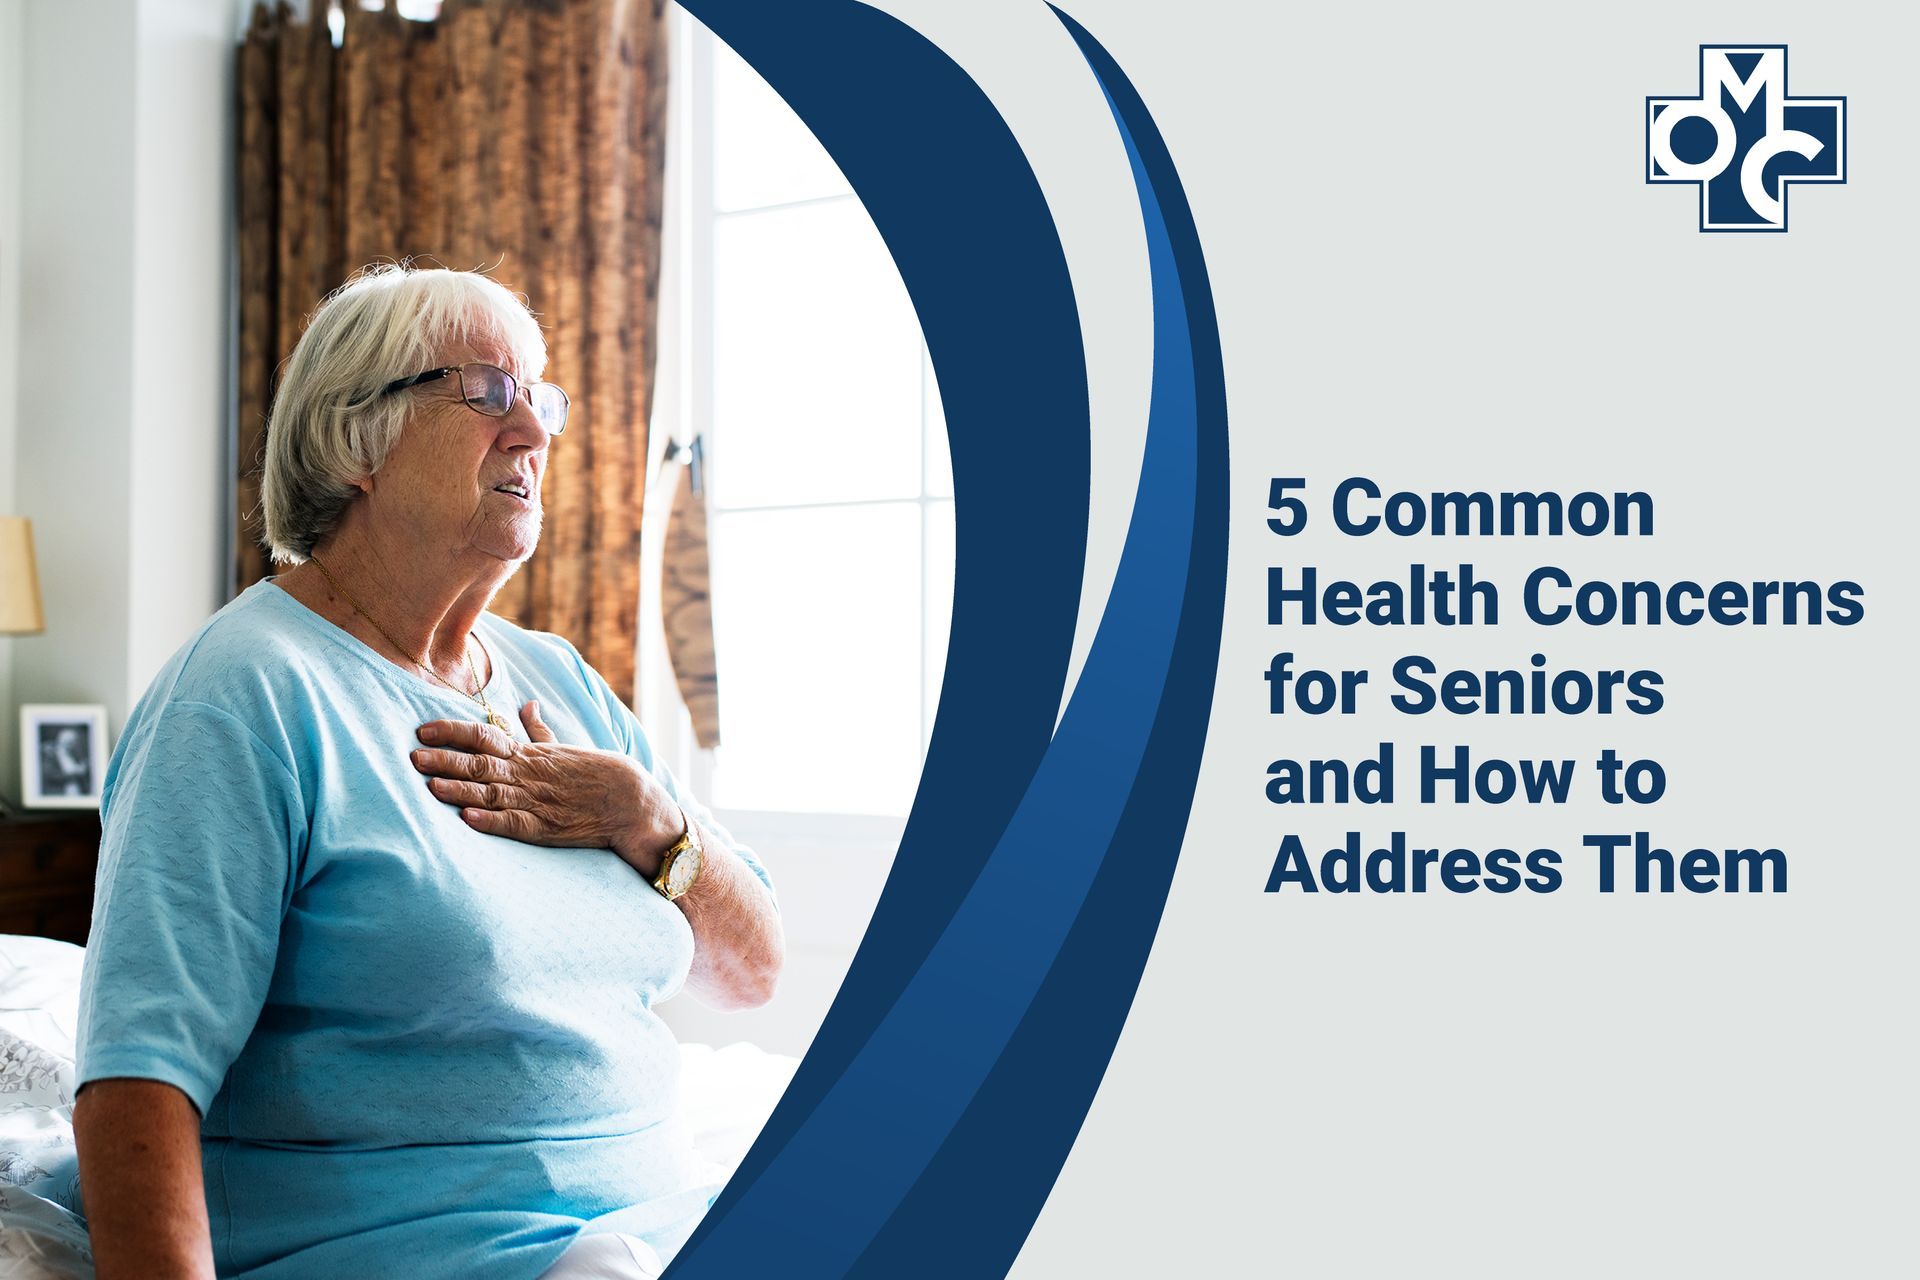 5 Common Health Concerns for Seniors and How to Address Them